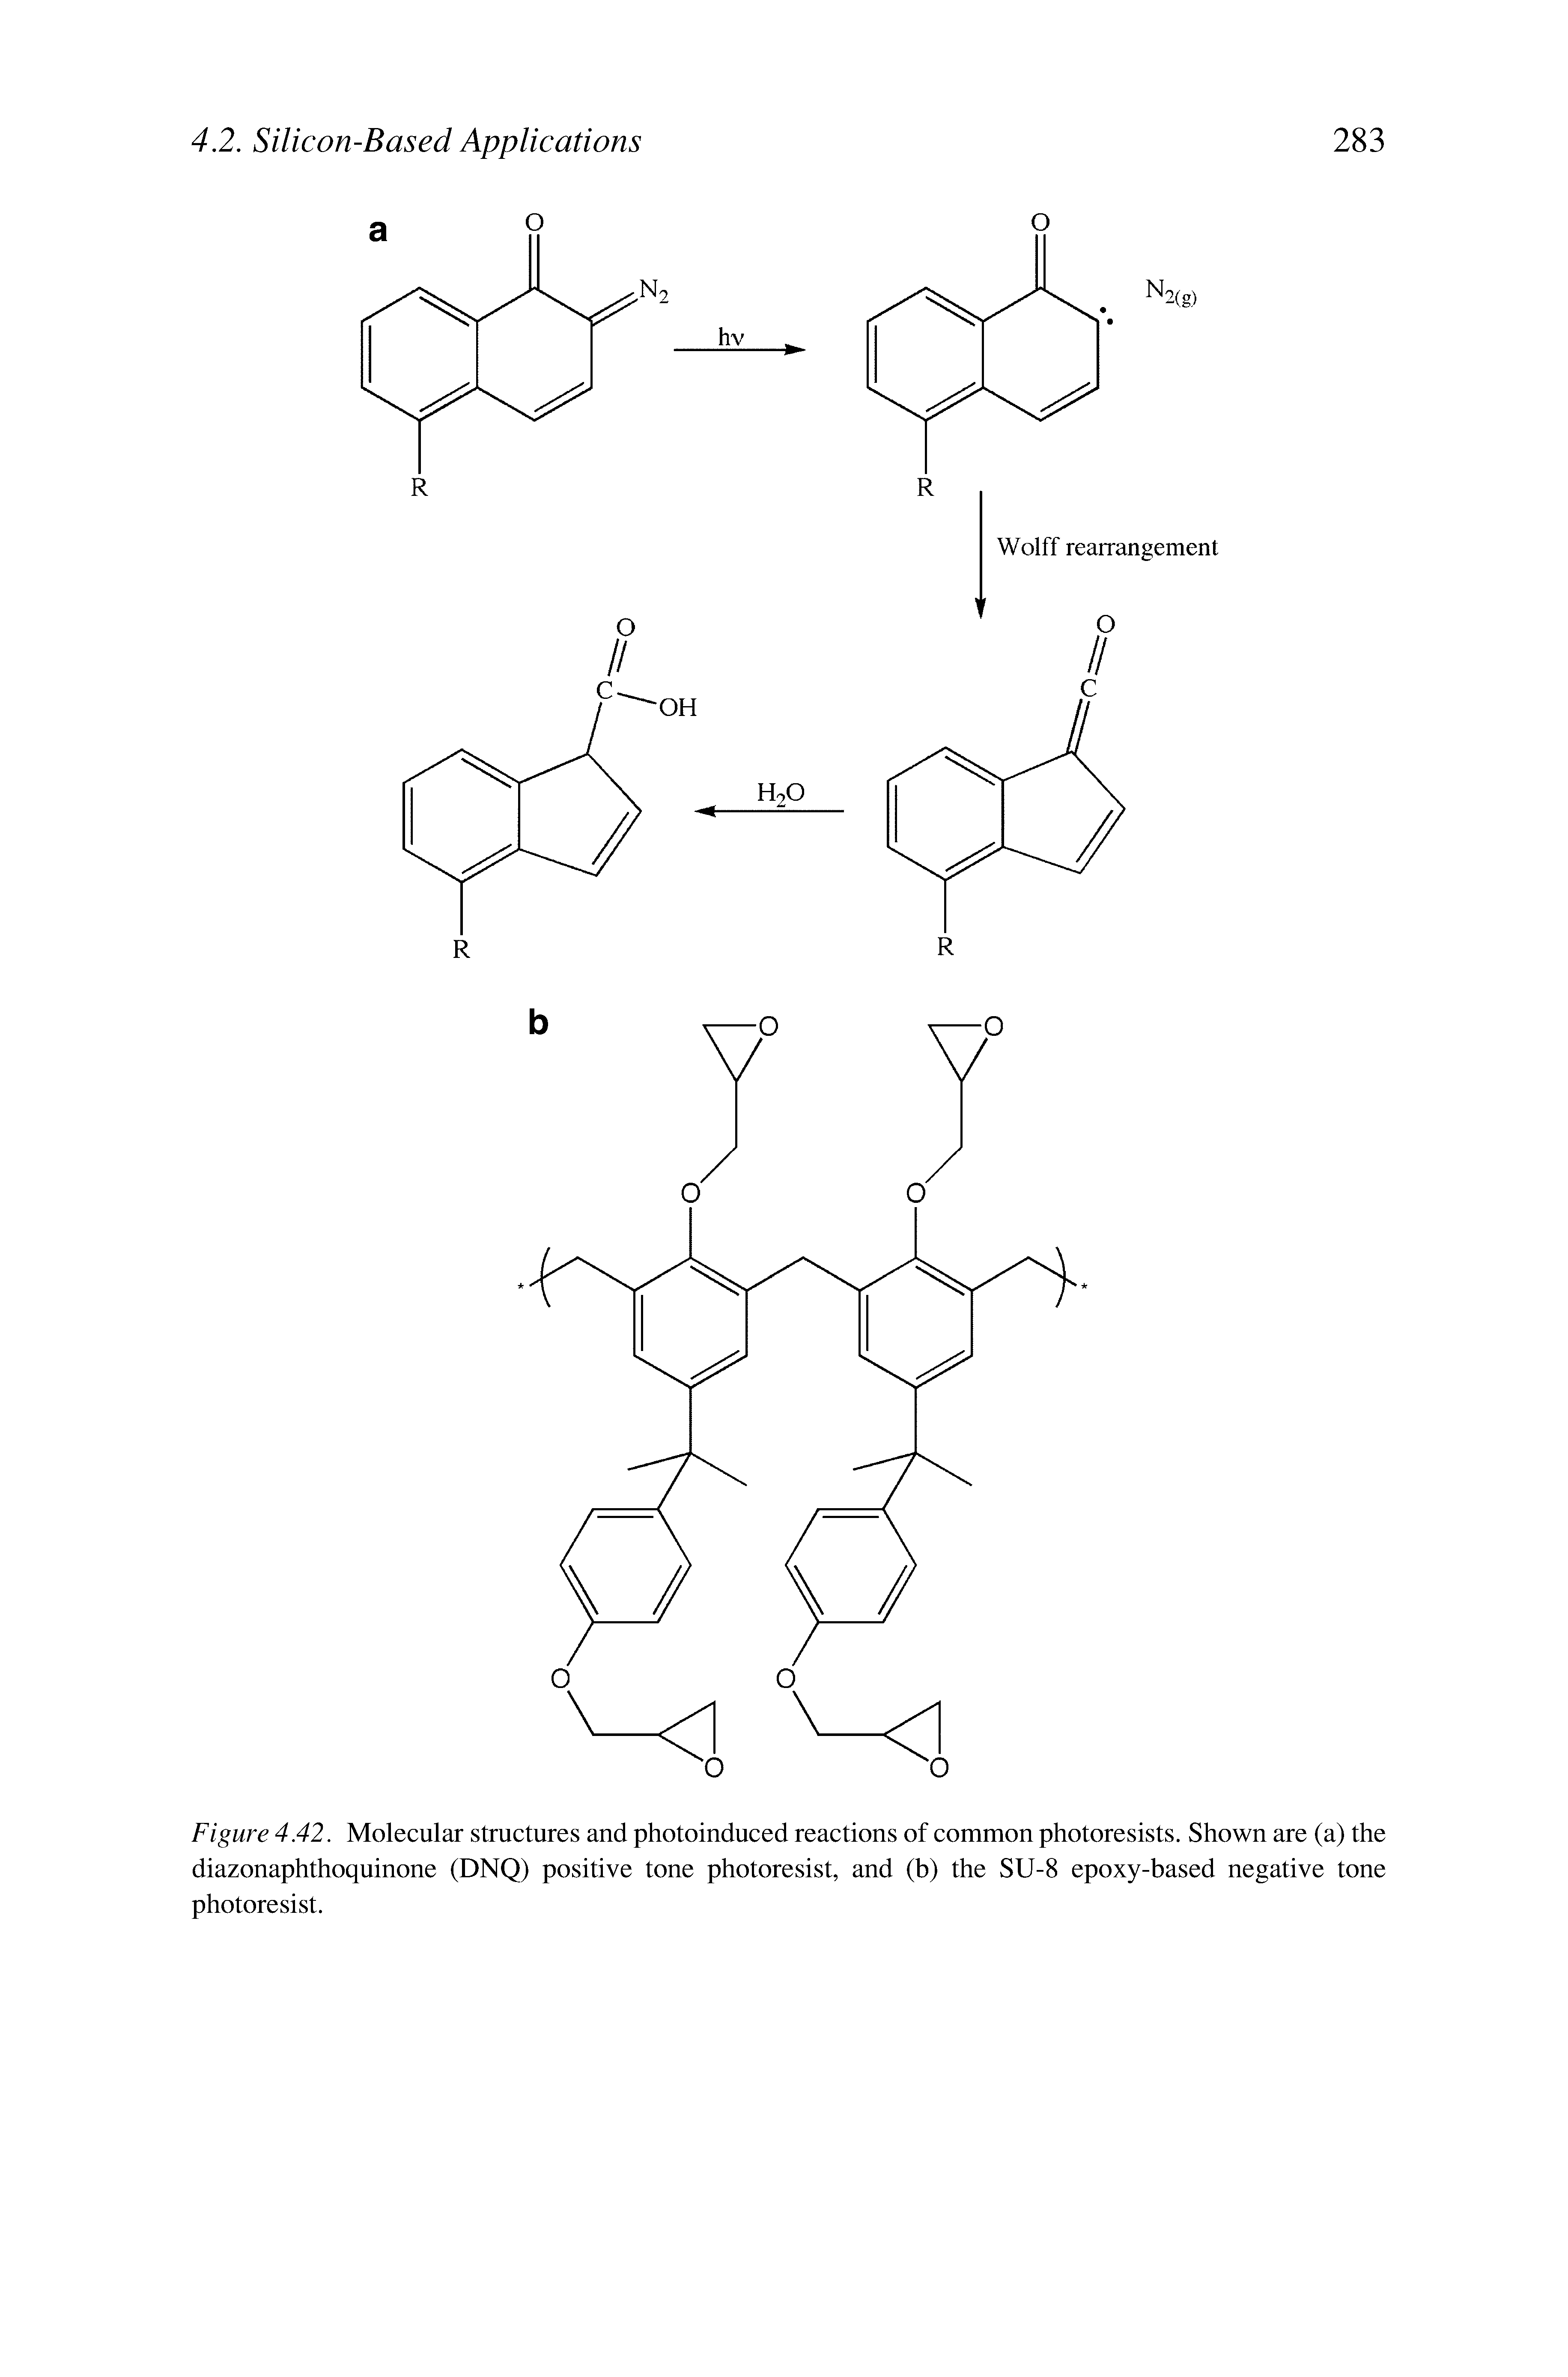 Figure 4.42. Molecular structures and photoinduced reactions of common photoresists. Shown are (a) the diazonaphthoquinone (DNQ) positive tone photoresist, and (b) the SU-8 epoxy-based negative tone photoresist.